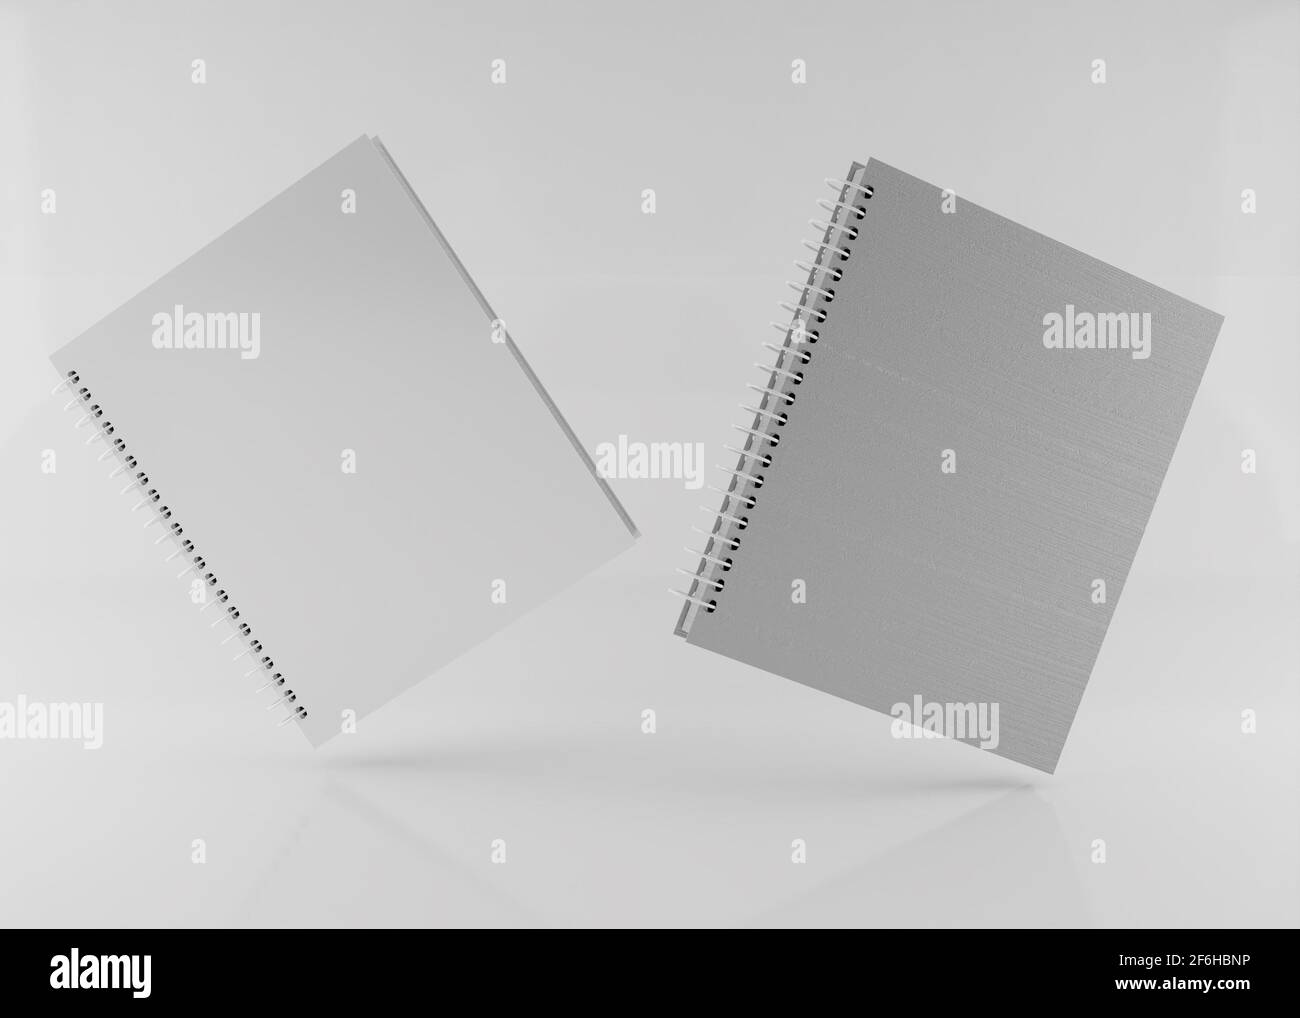 Two flying paper notebooks 3d rendering for mockup Stock Photo